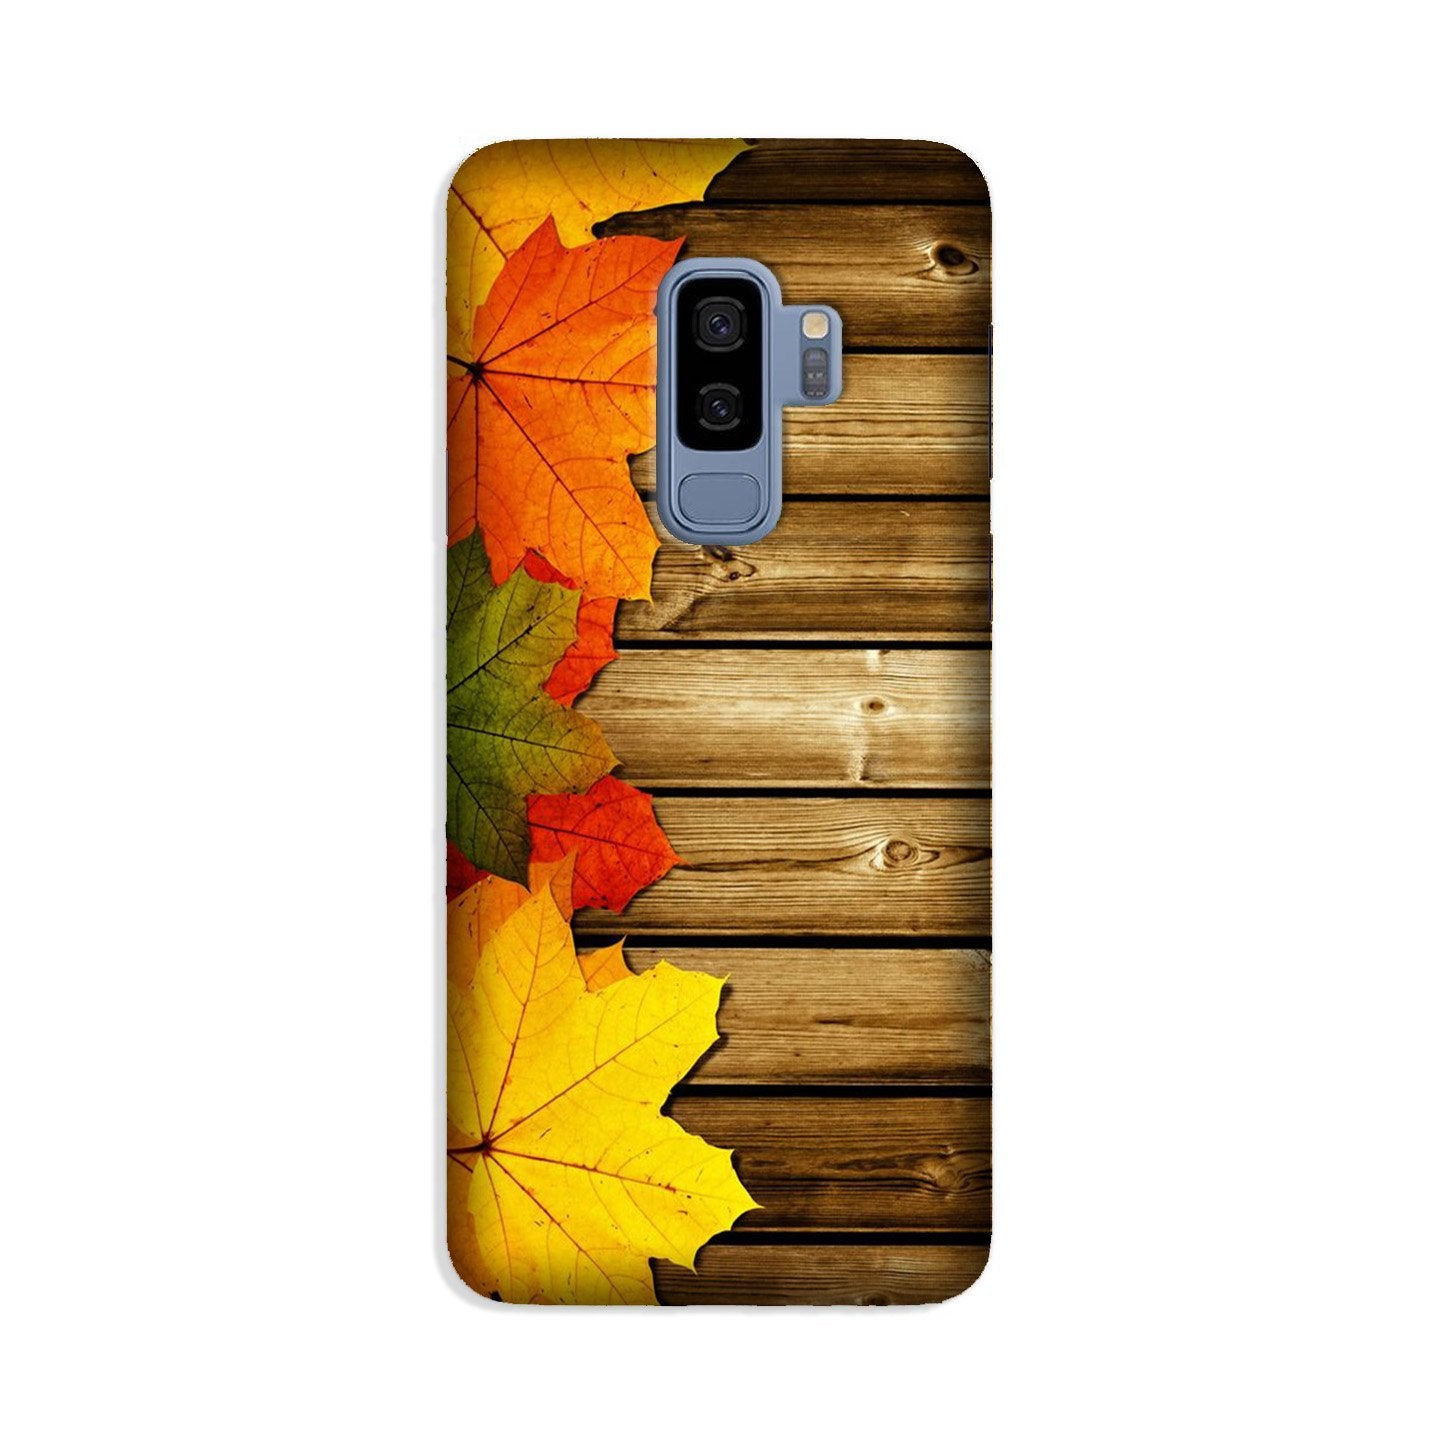 Wooden look3 Case for Galaxy S9 Plus